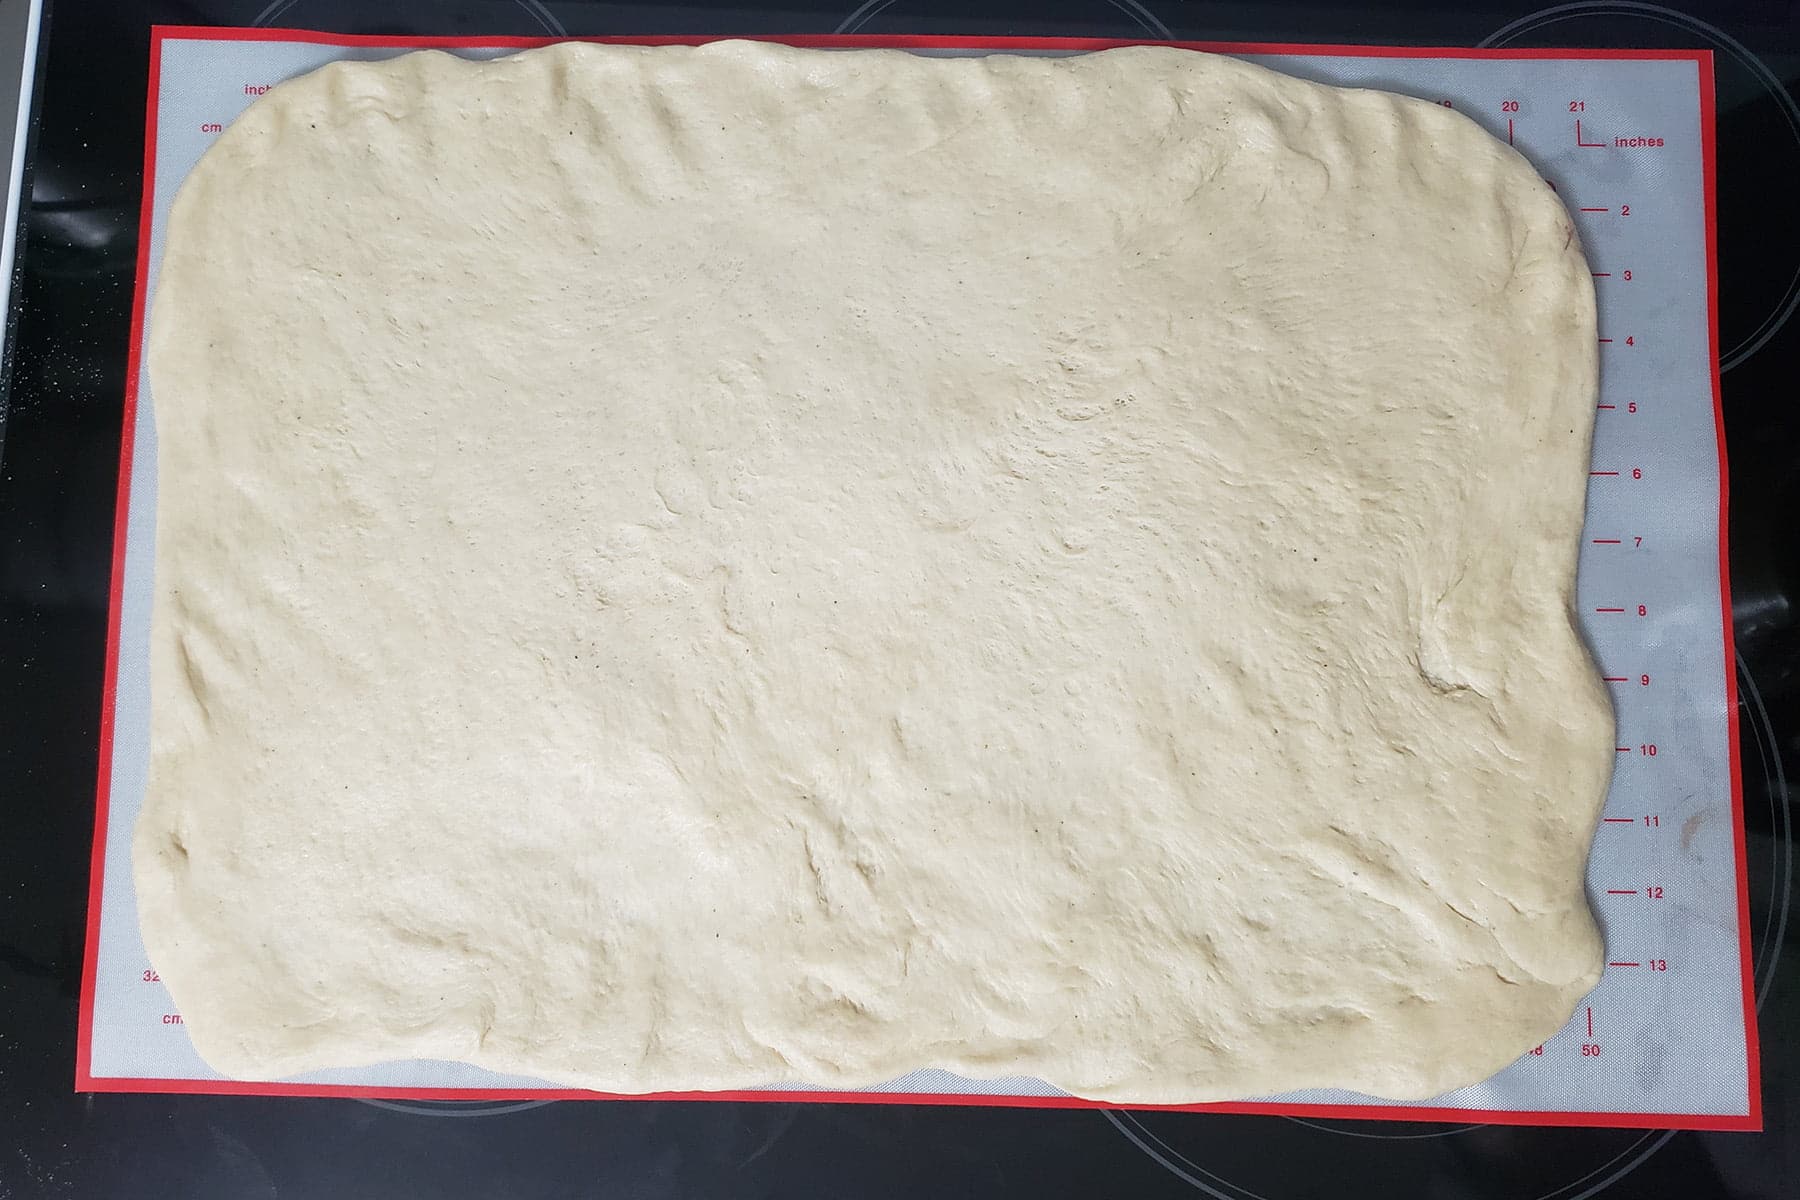 A large rectangle of dough is rolled out on a silicone baking sheet.